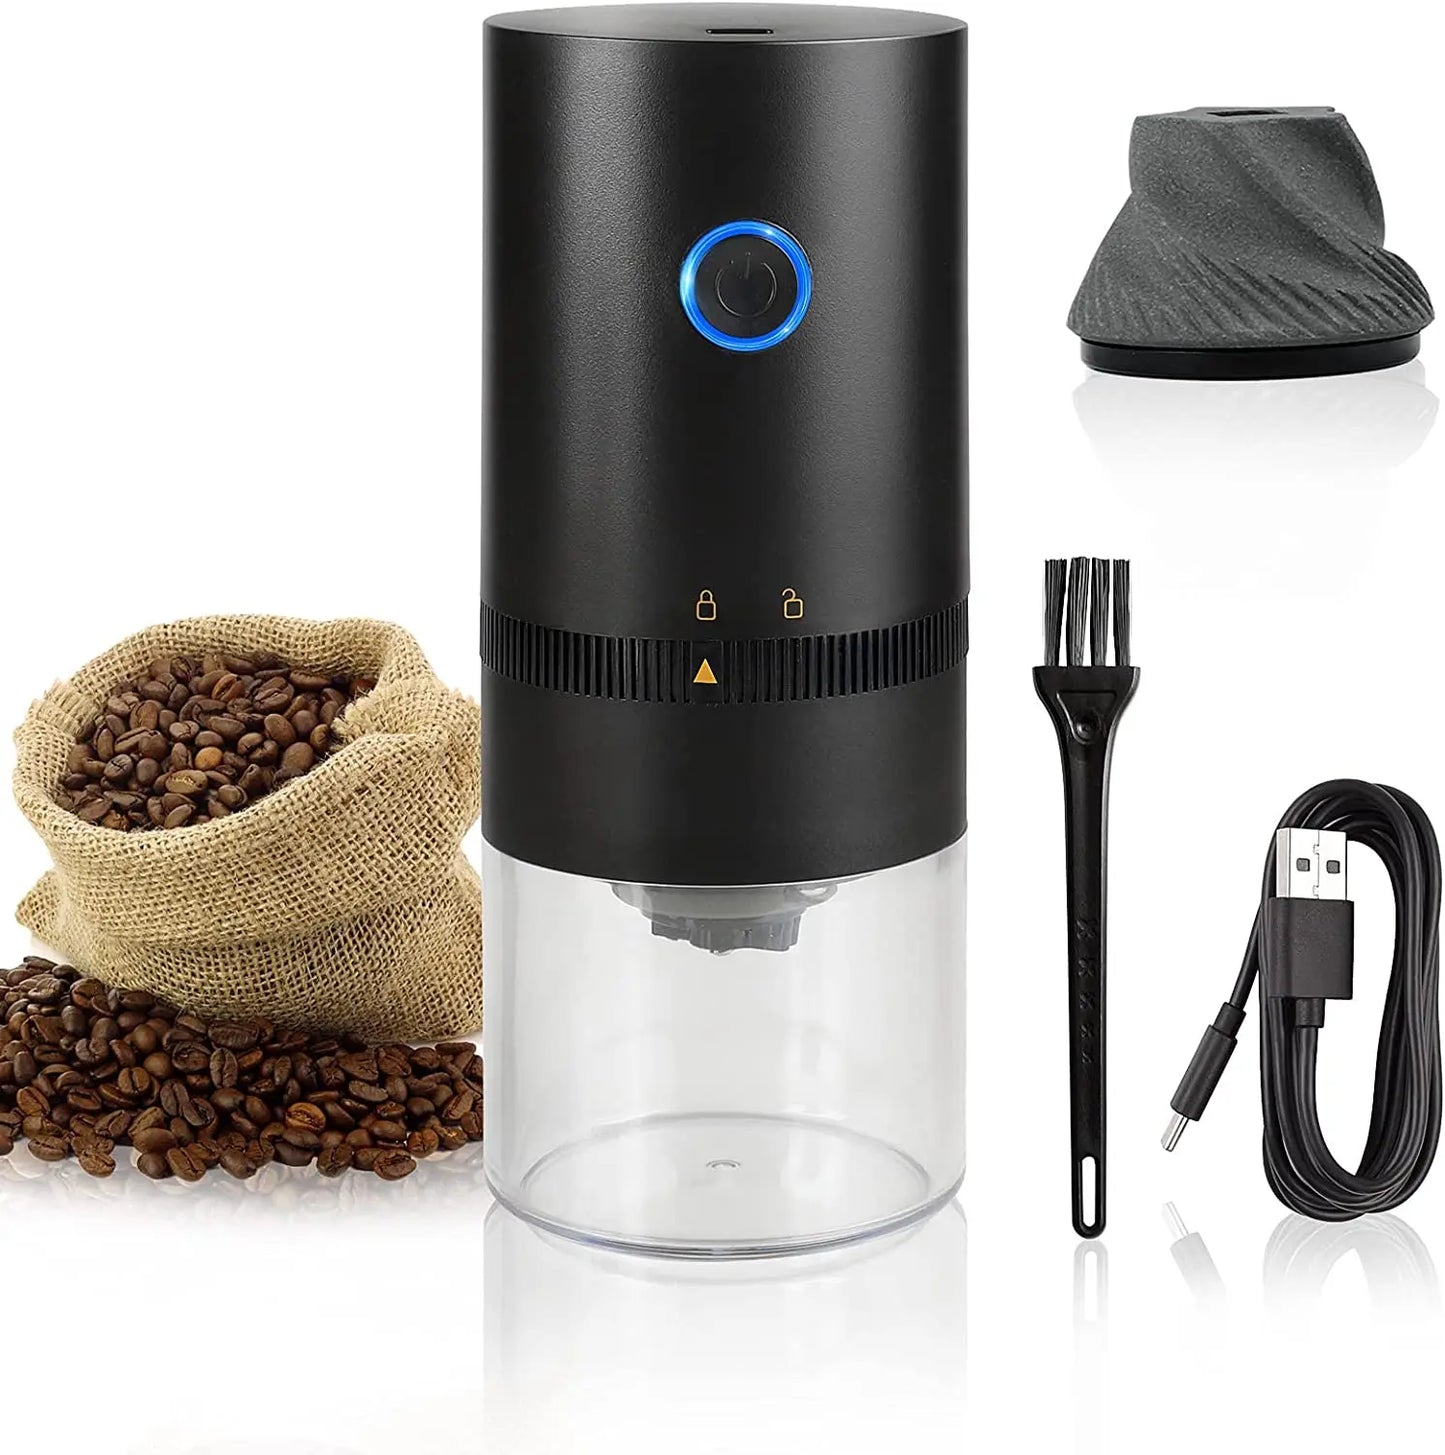 Portable Electric Coffee Grinder - USB Type-C Rechargeable Ceramic Grinding Core for Professional Coffee Beans Grinding